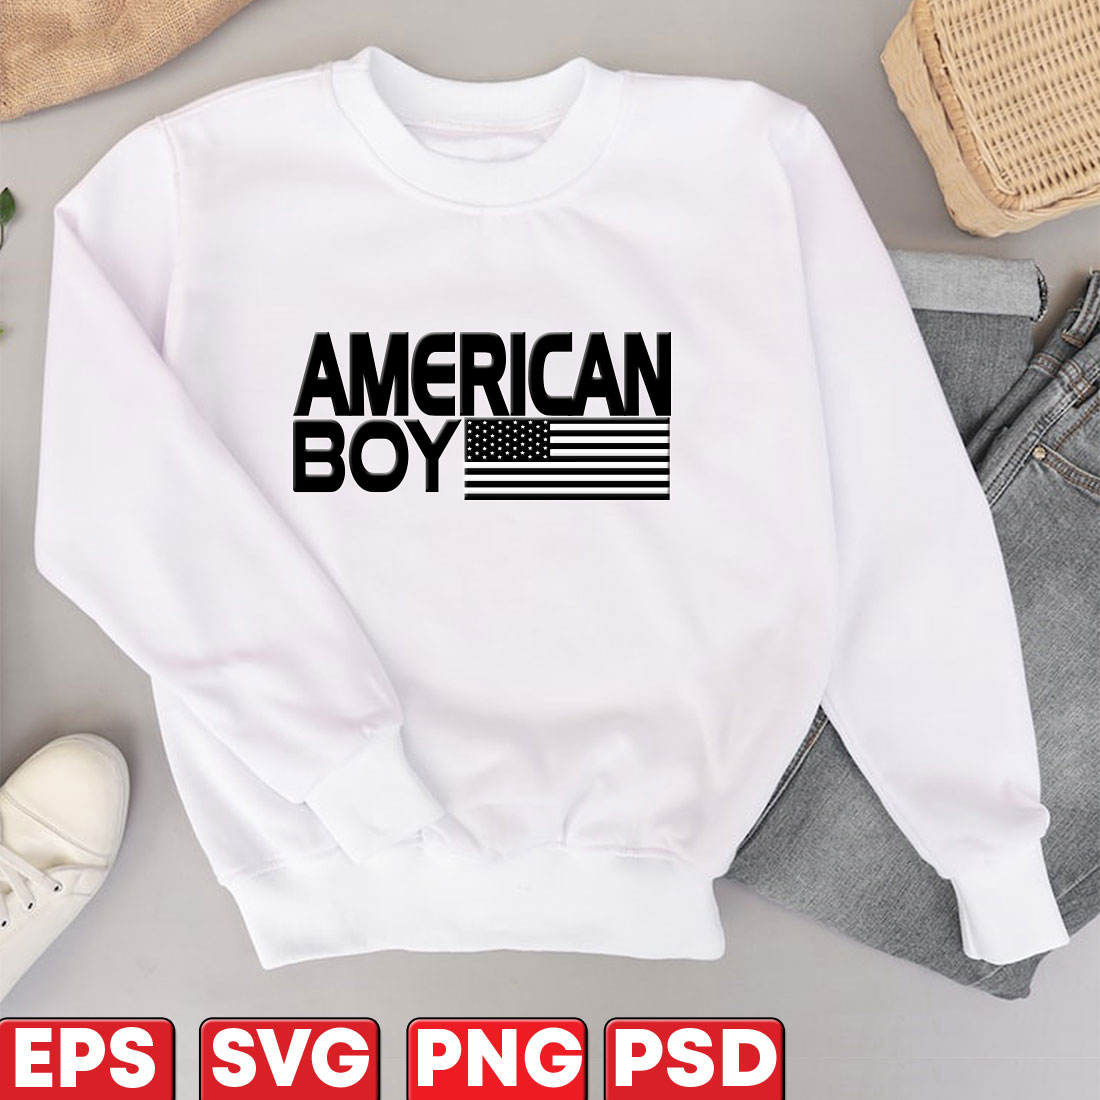 All American boy cover image.